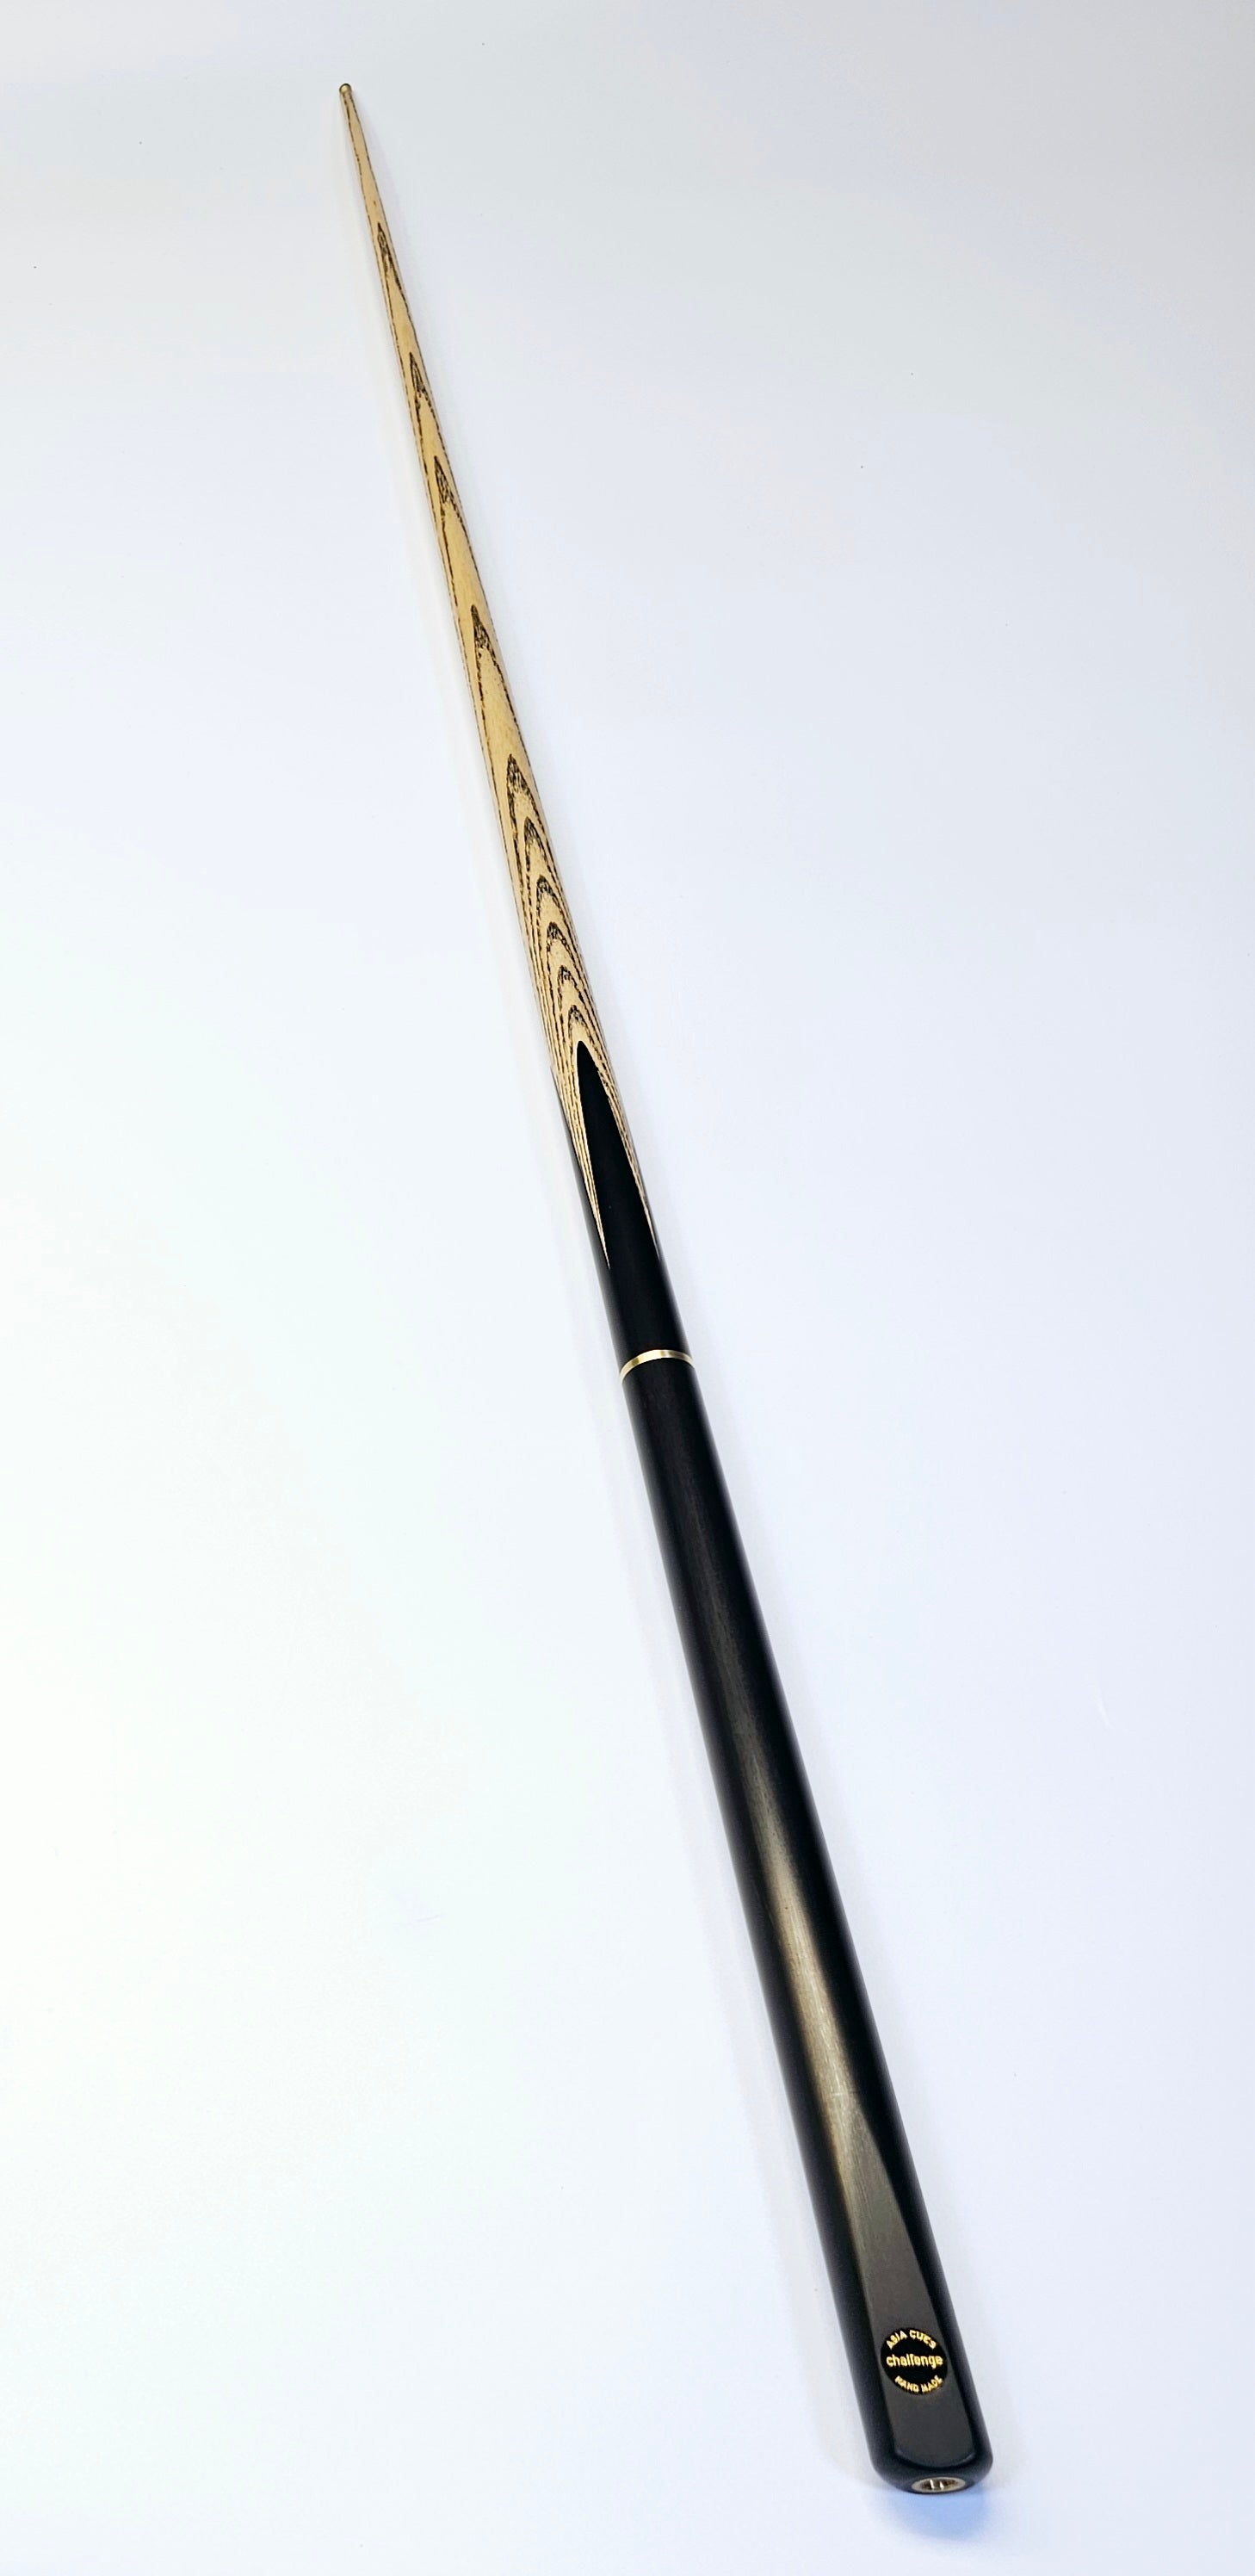 Asia Cues Challenge - 3/4 Jointed Pool Cue 8.6mm Tip, 17.7oz, 58"